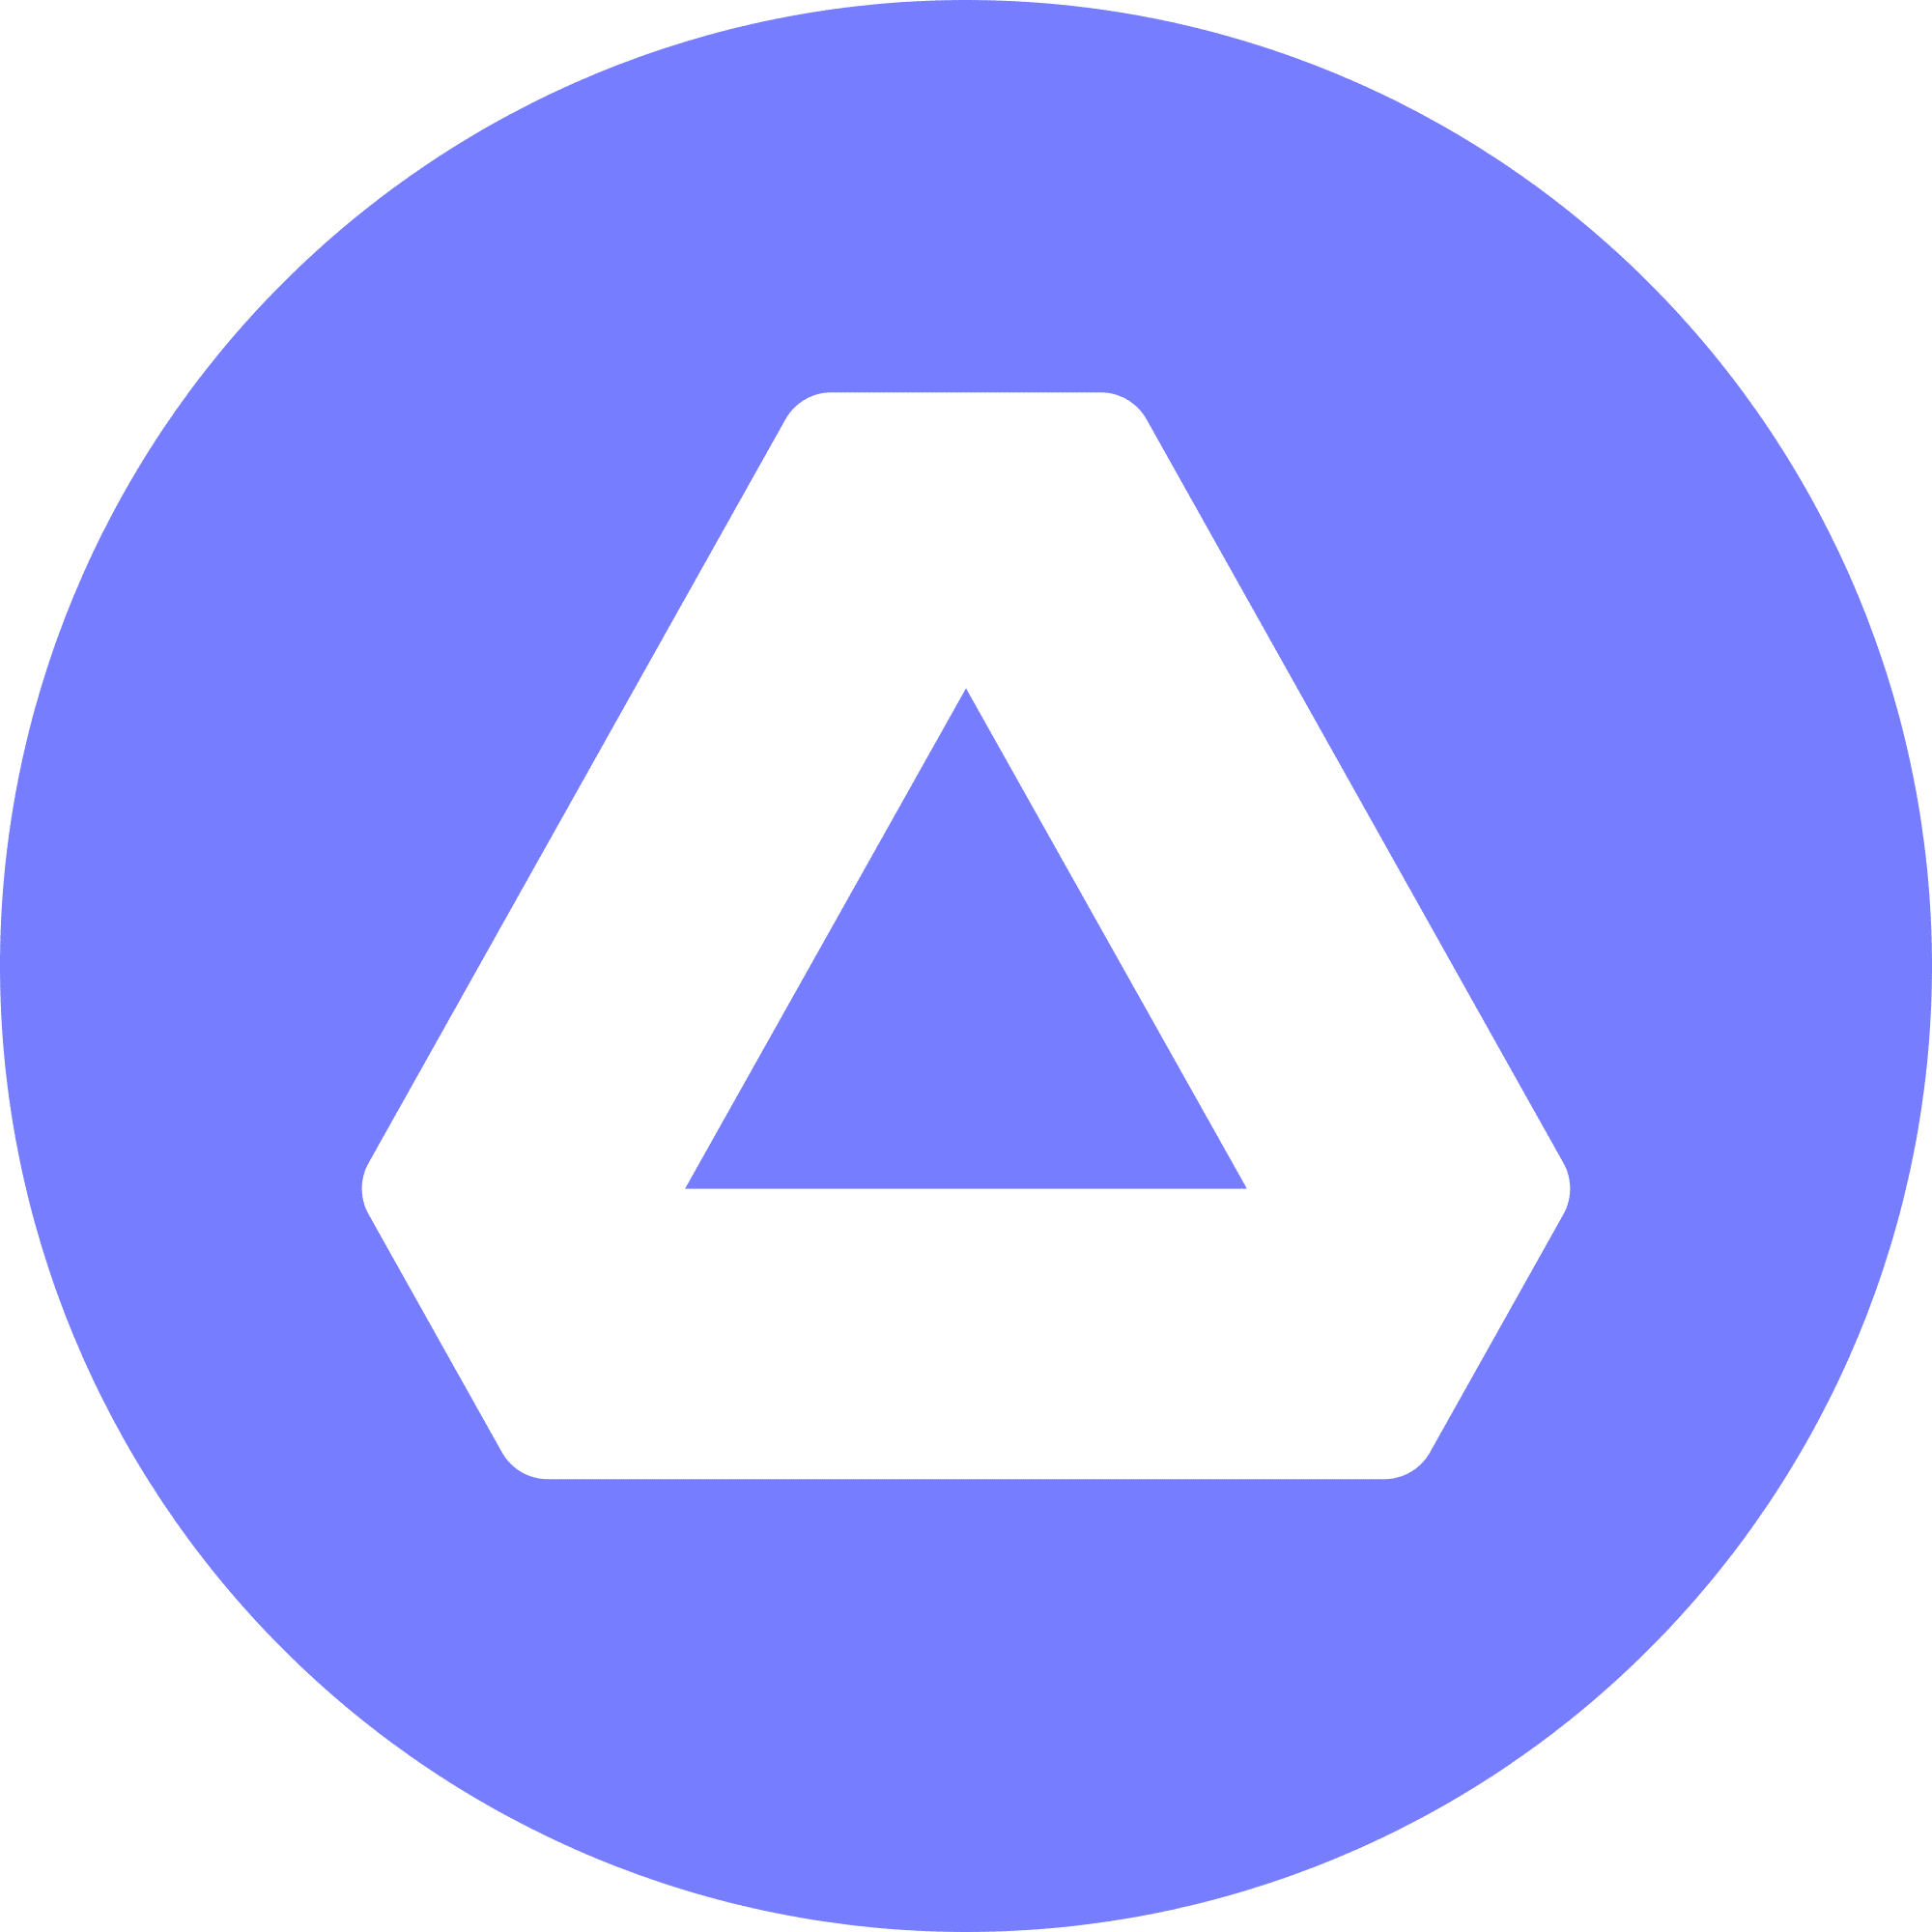 Achain logo in png format